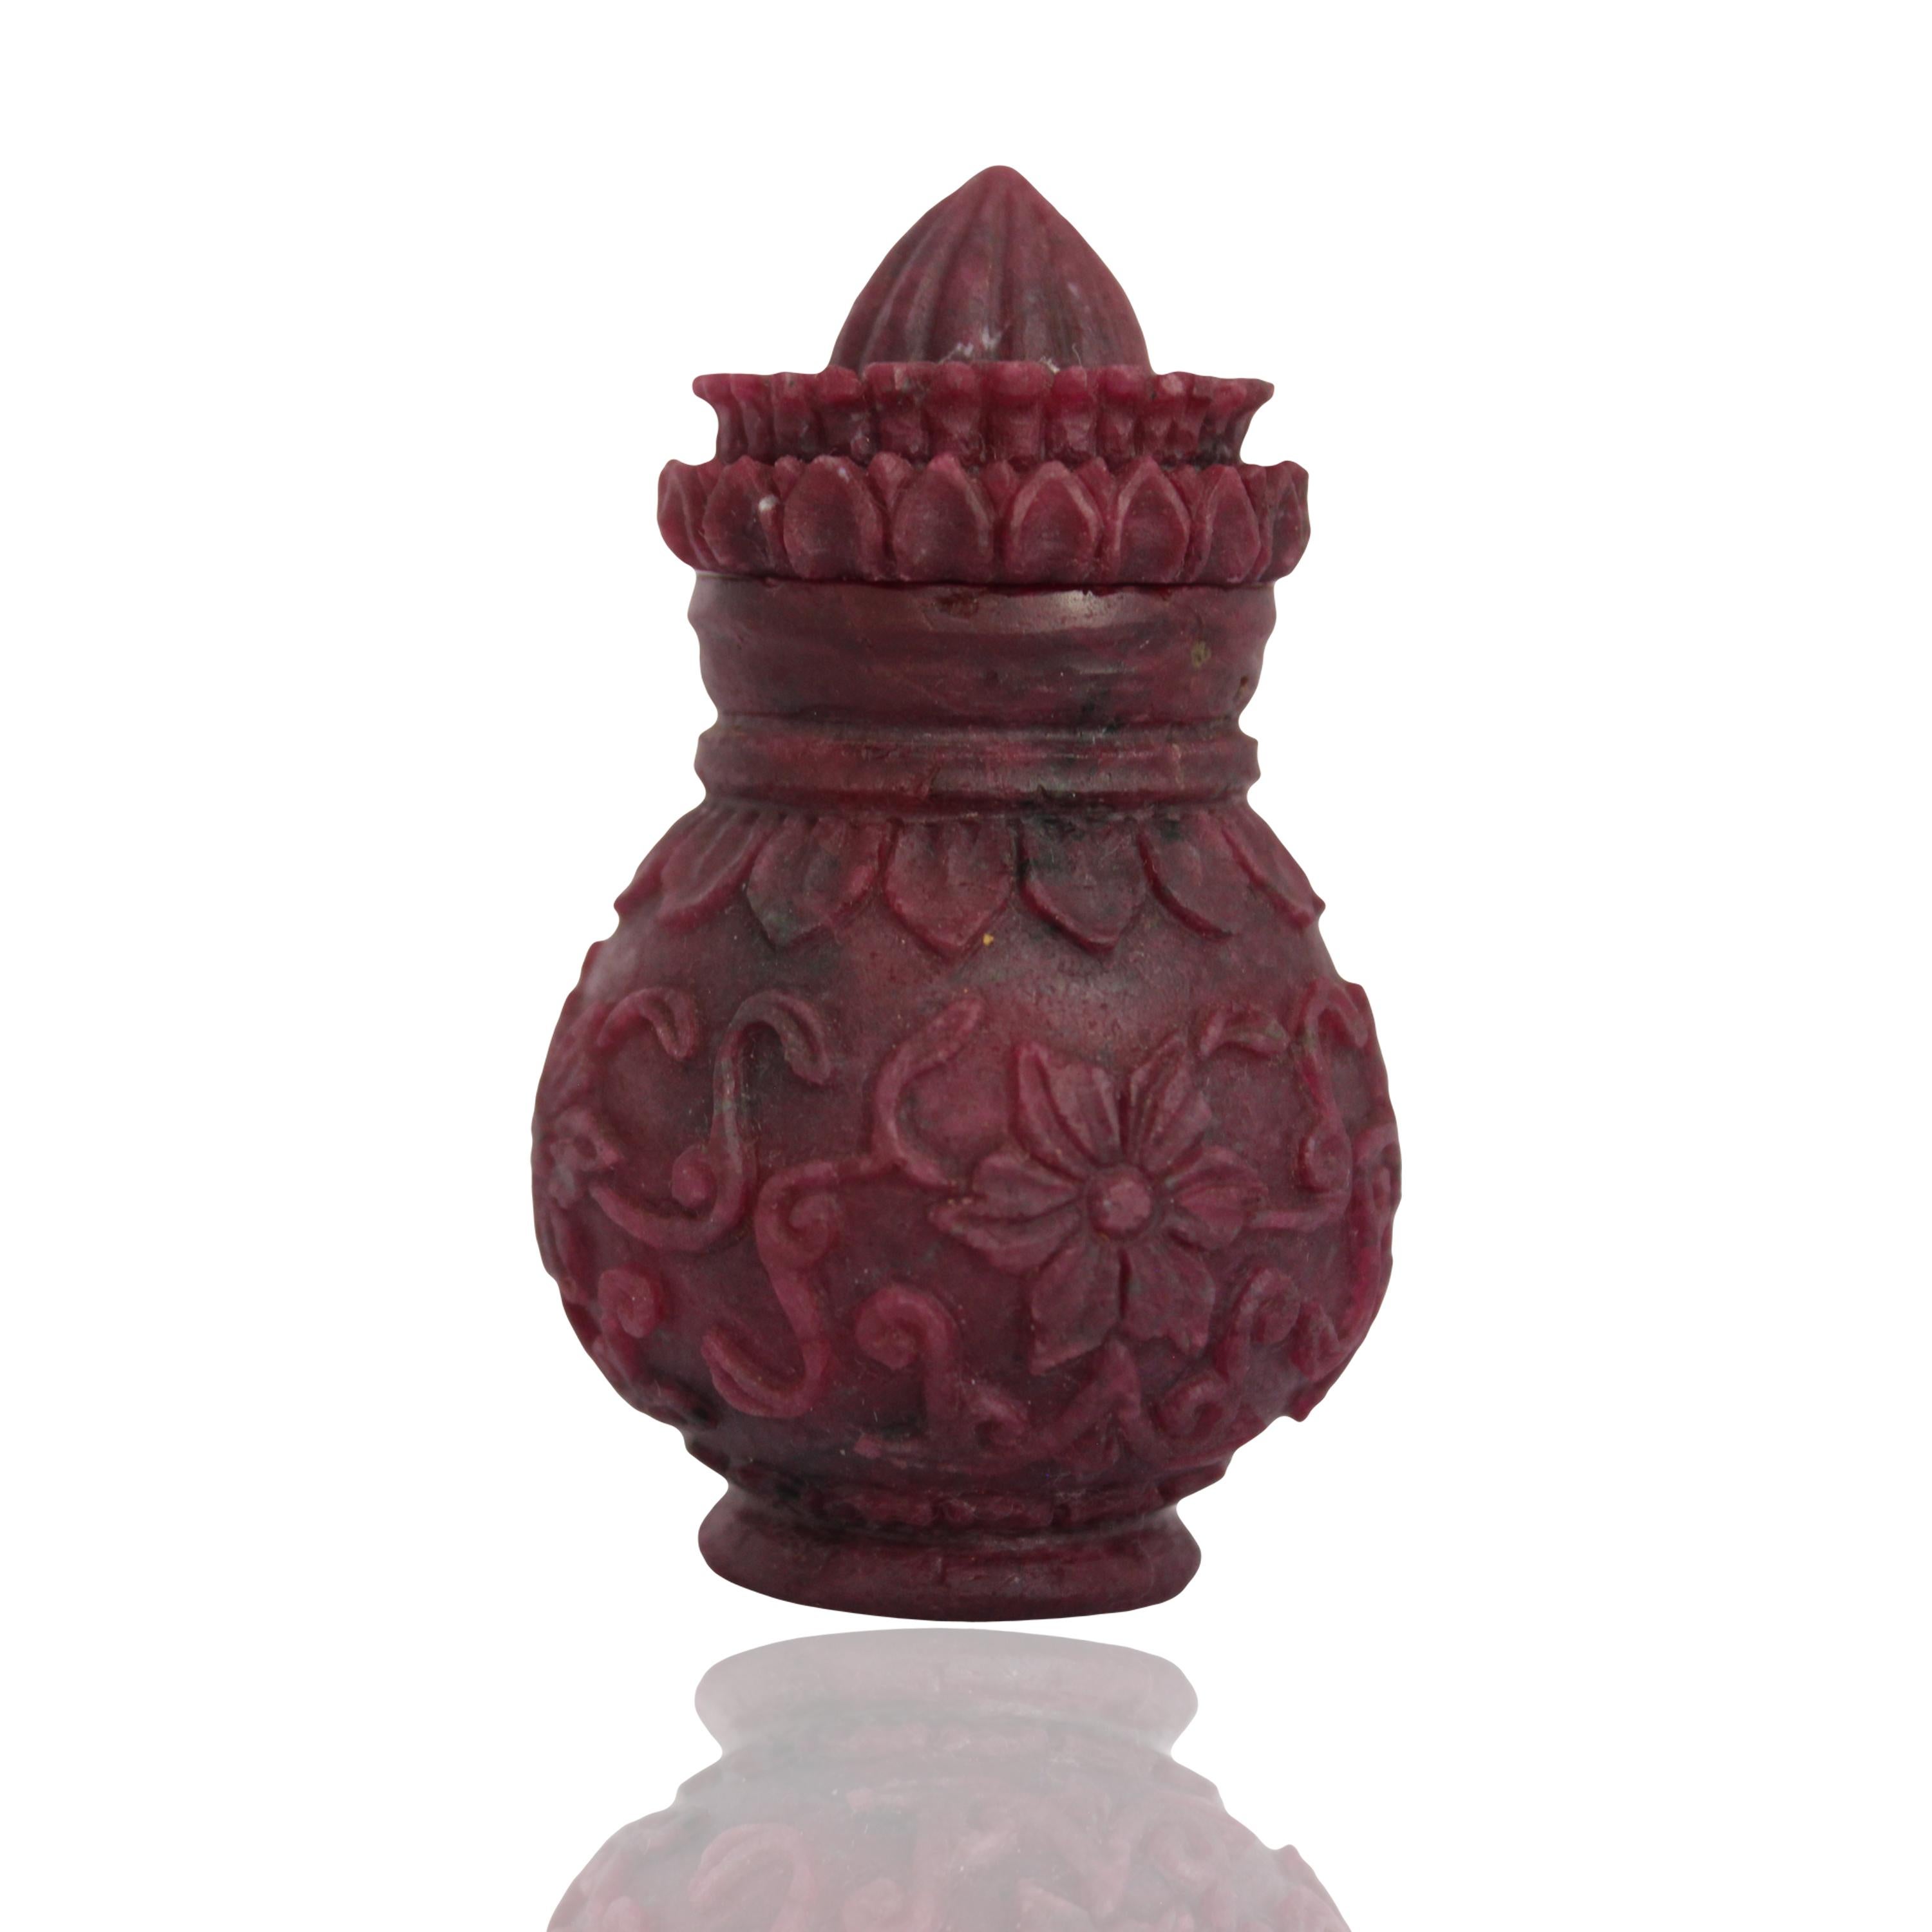 A natural ruby hand carved bottle hollowed from inside to keep vermilion, perfume or any other small precious holding. The bottle is shaped in form of traditional Indian design of Kalash used during various Indian celebration specially kept as on